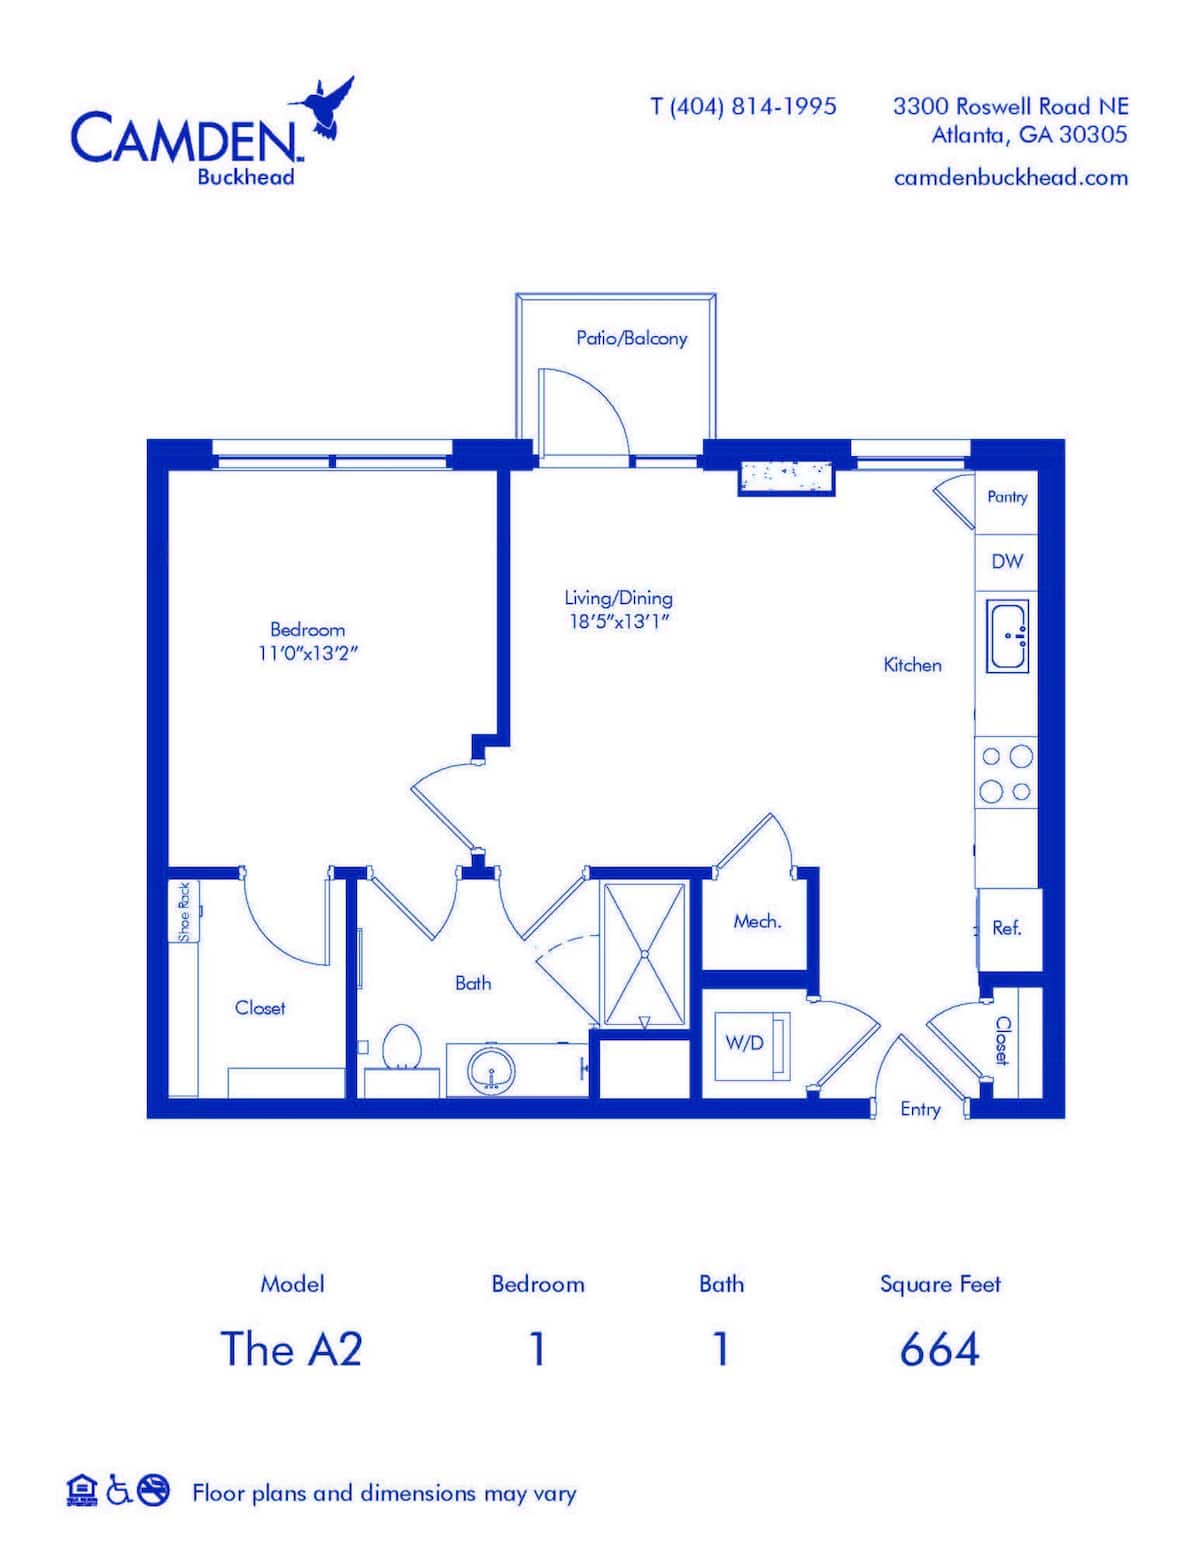 Floorplan diagram for The A2, showing 1 bedroom